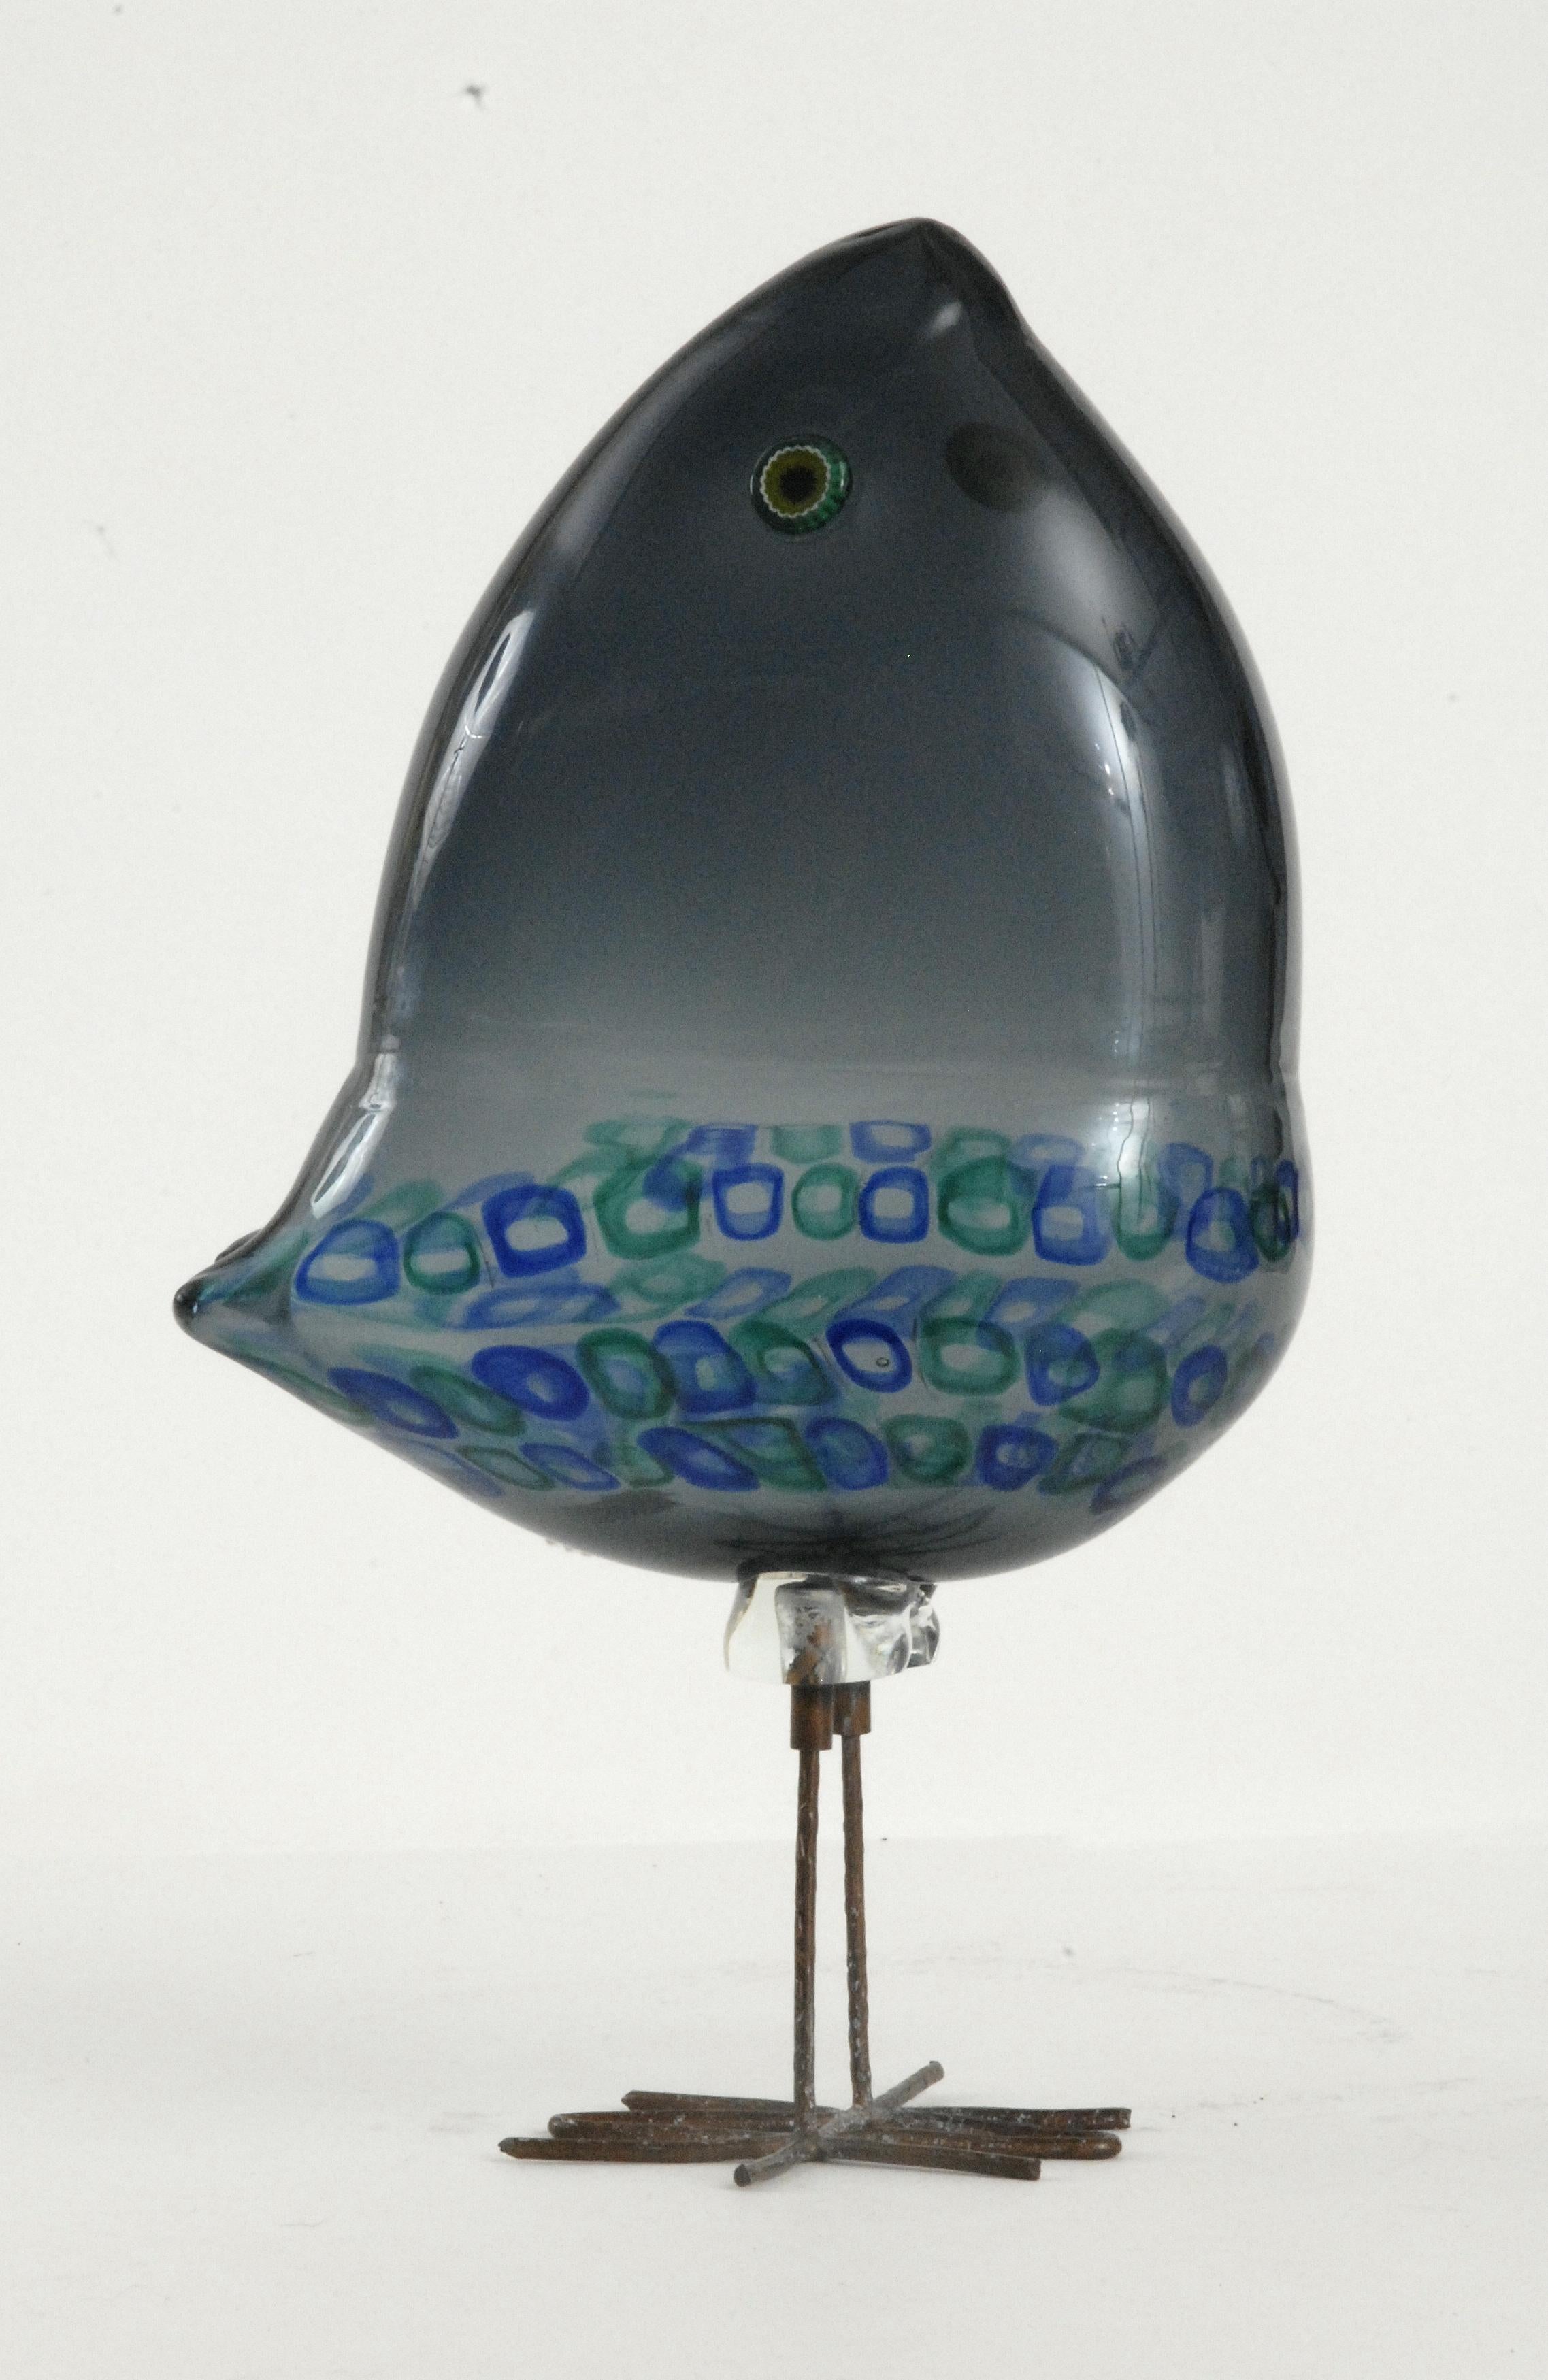 A rare blue grey glass 'Pulcino' with murrine glass eyes and copper feet. Made by Vistosi at Murano in Italy. Designed by Alessandro Pianon in 1963.
With its original Vistosi paper label.